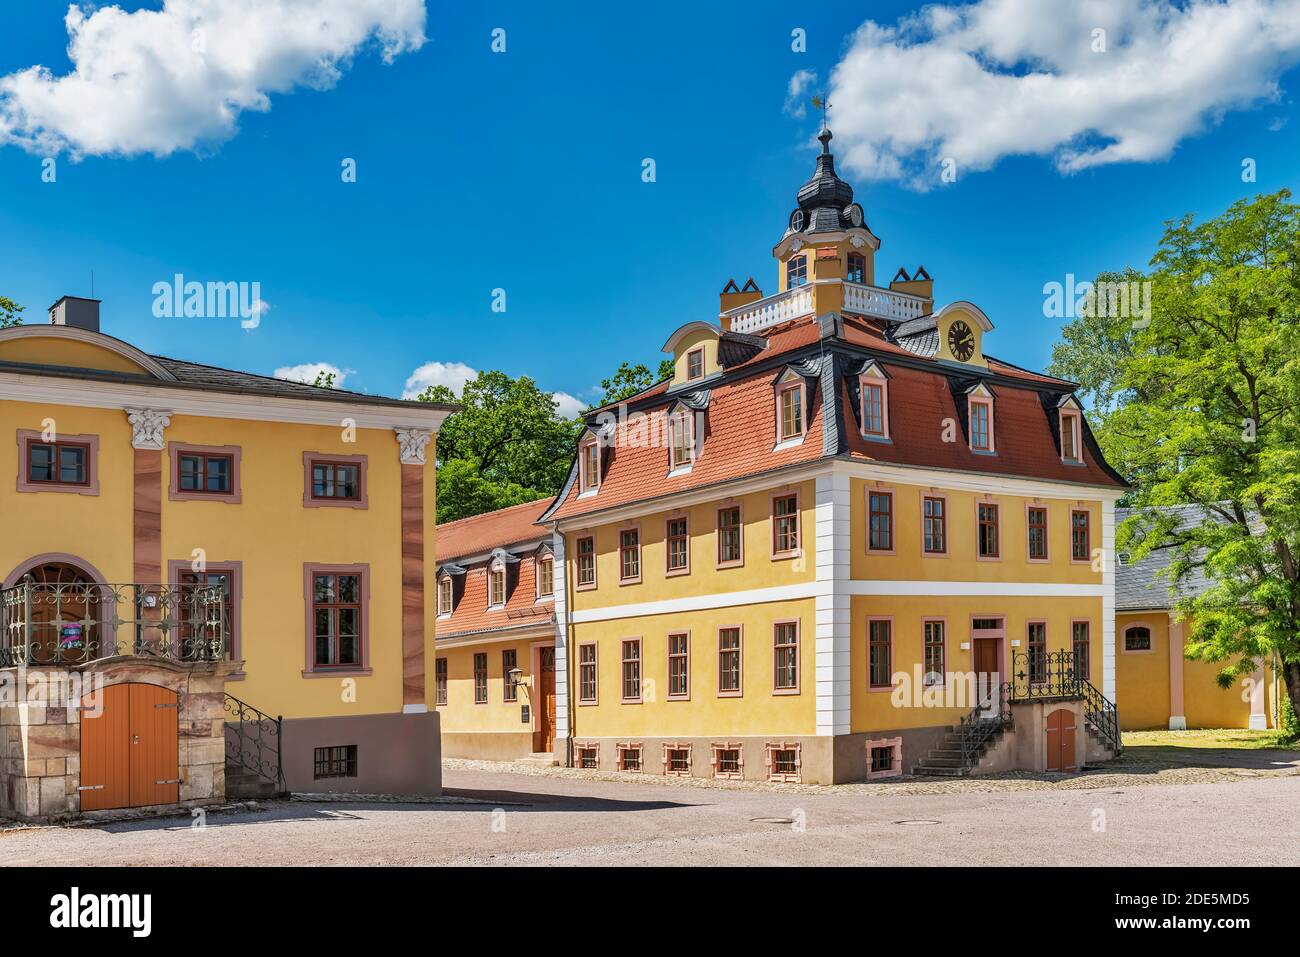 Cavalier houses in the Belvedere Palace, Weimar, Thuringia, Germany, Europe Stock Photo